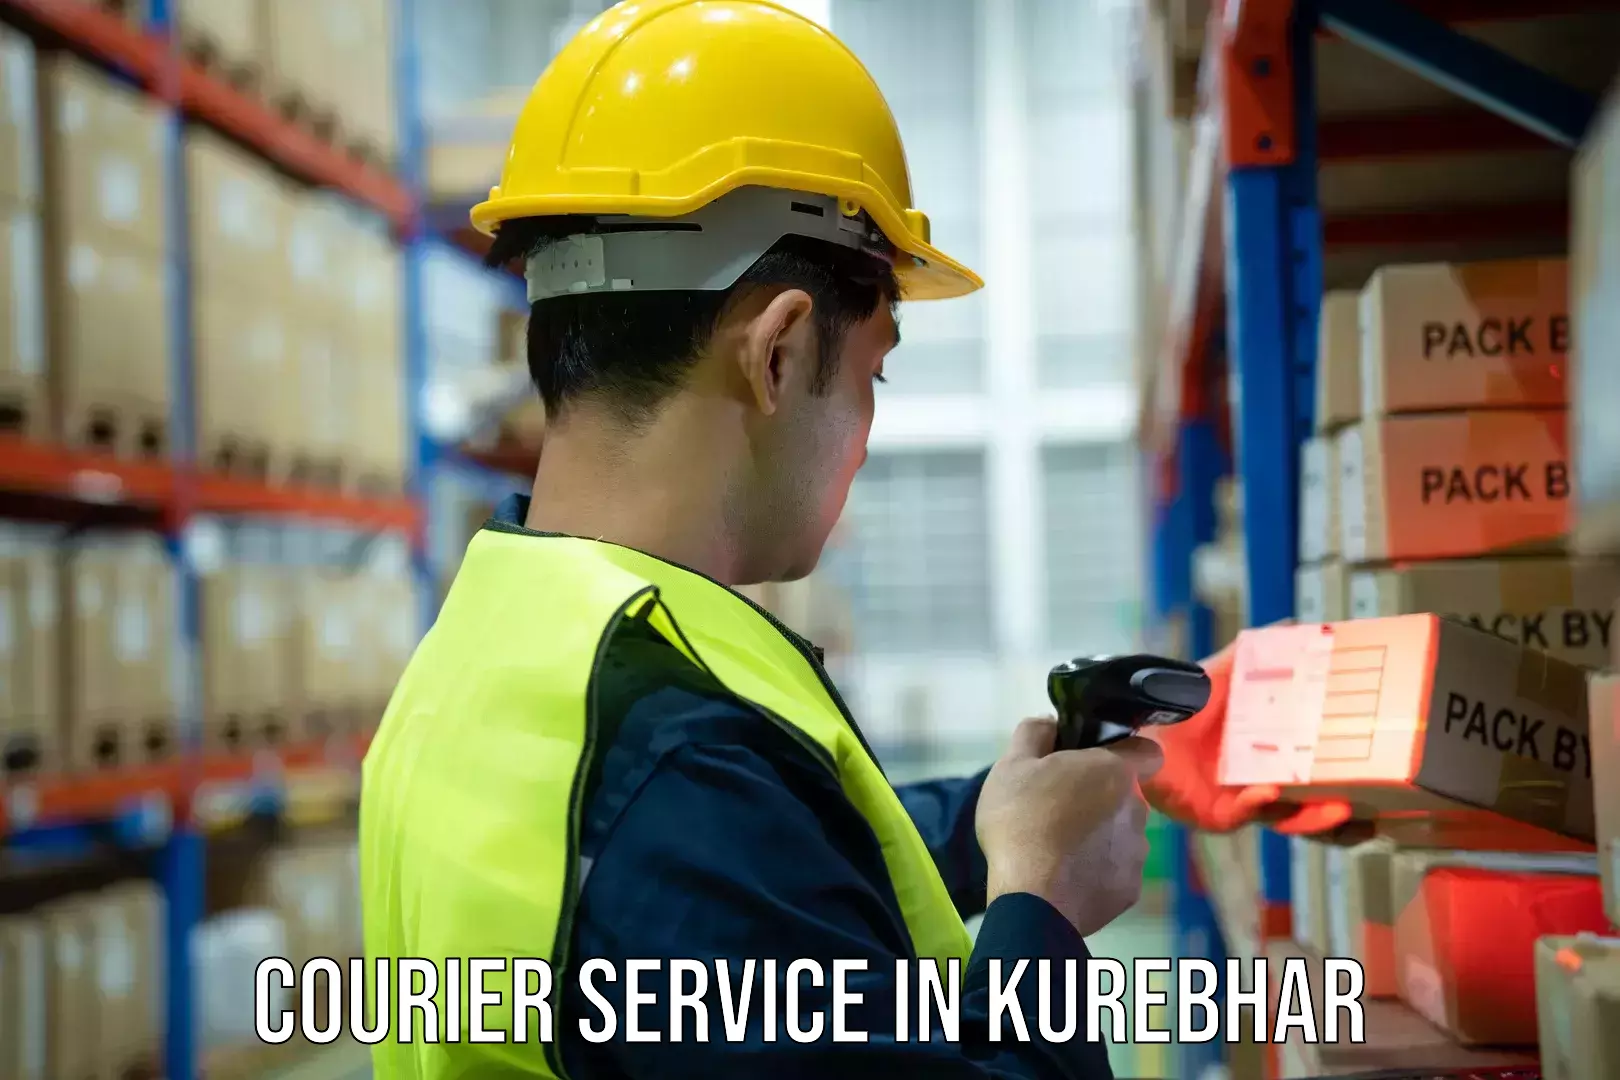 Sustainable shipping practices in Kurebhar